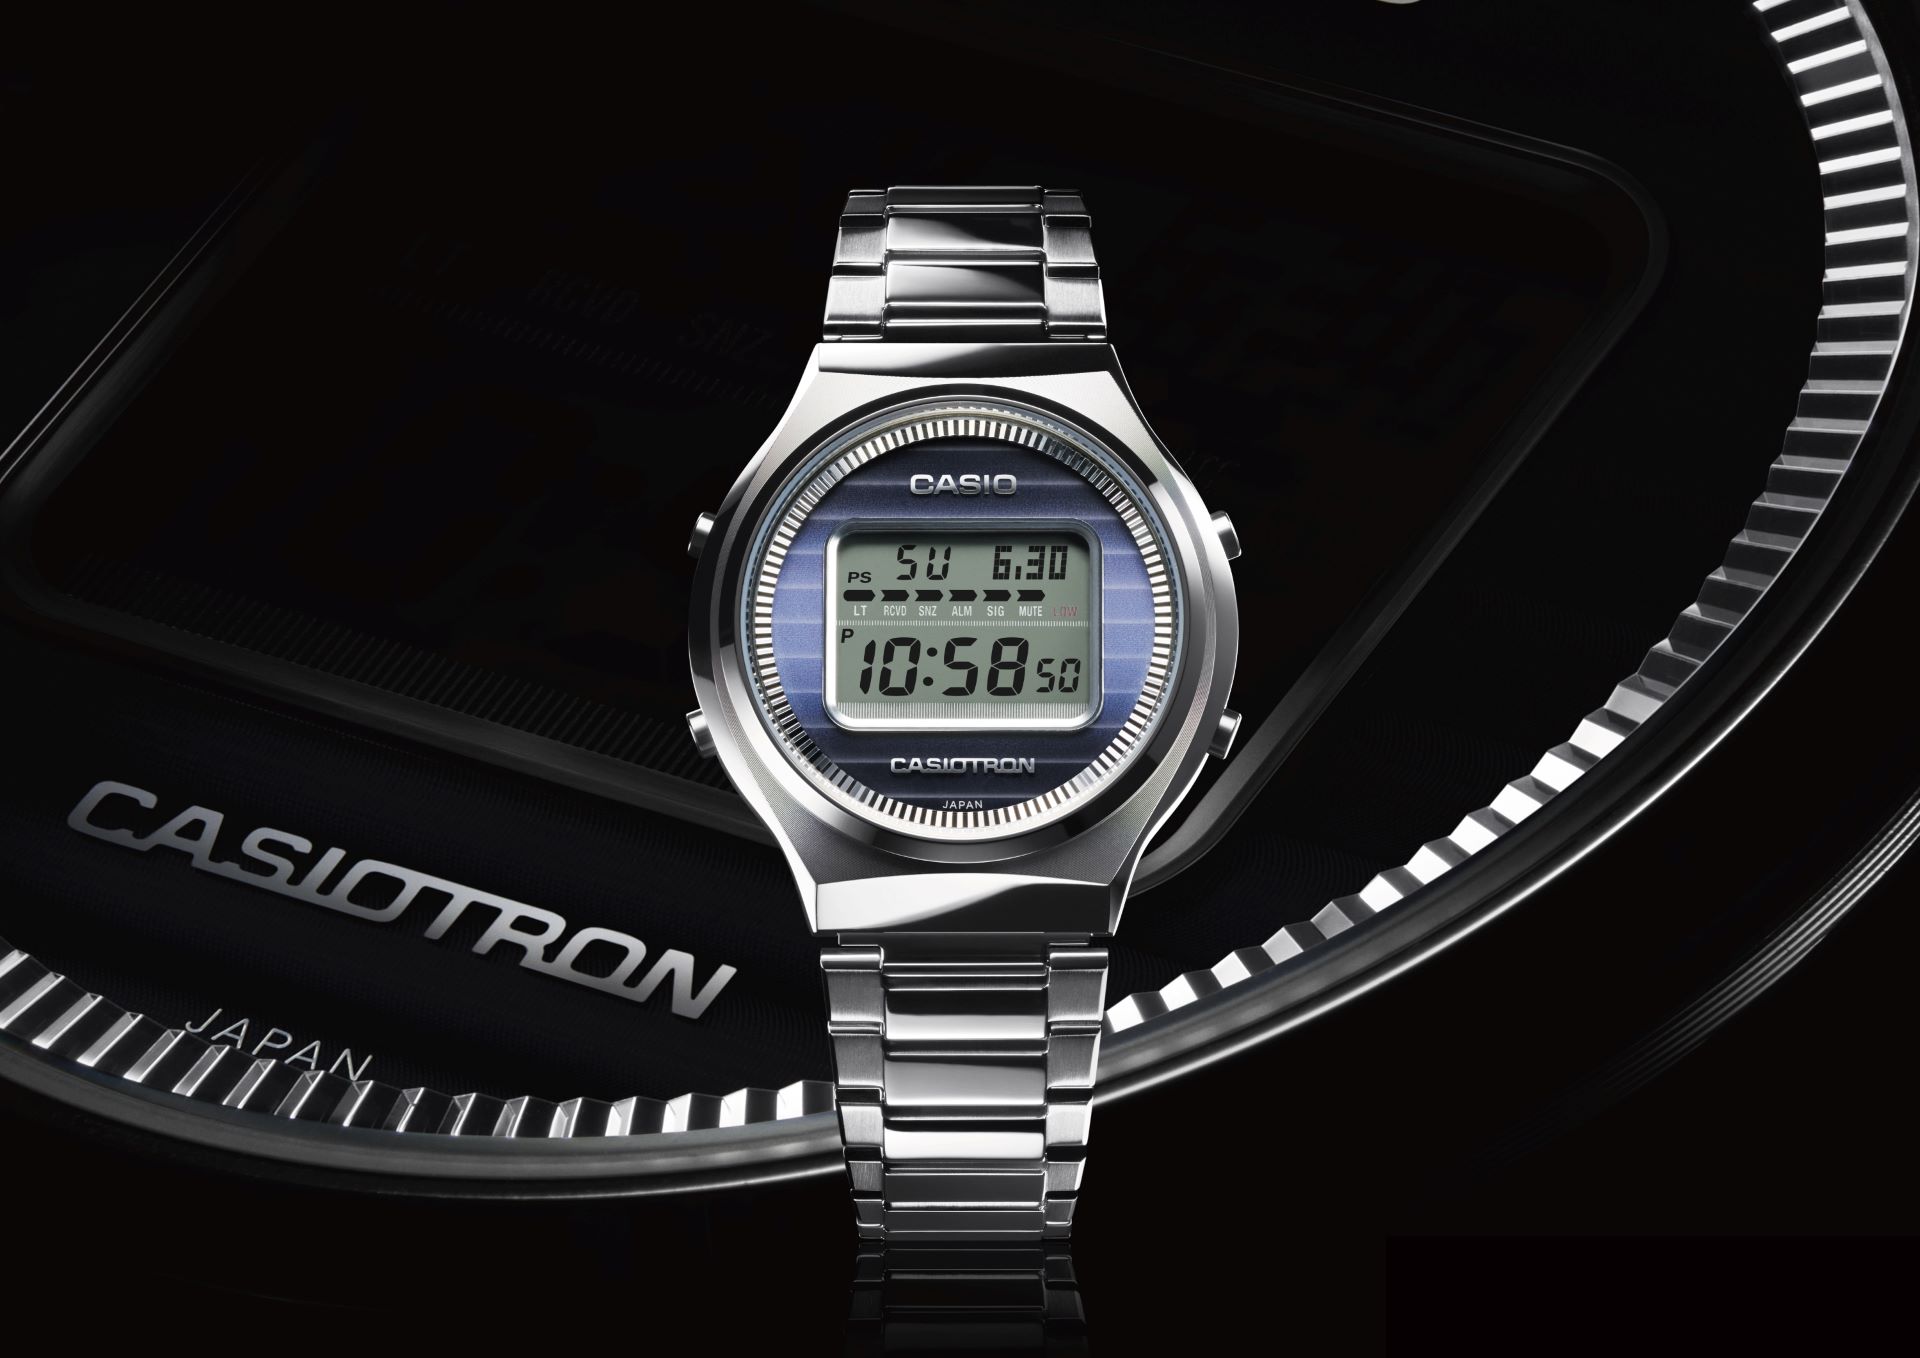 Casio Marks 50th Anniversary with Limited-Edition Casiotron TRN-50